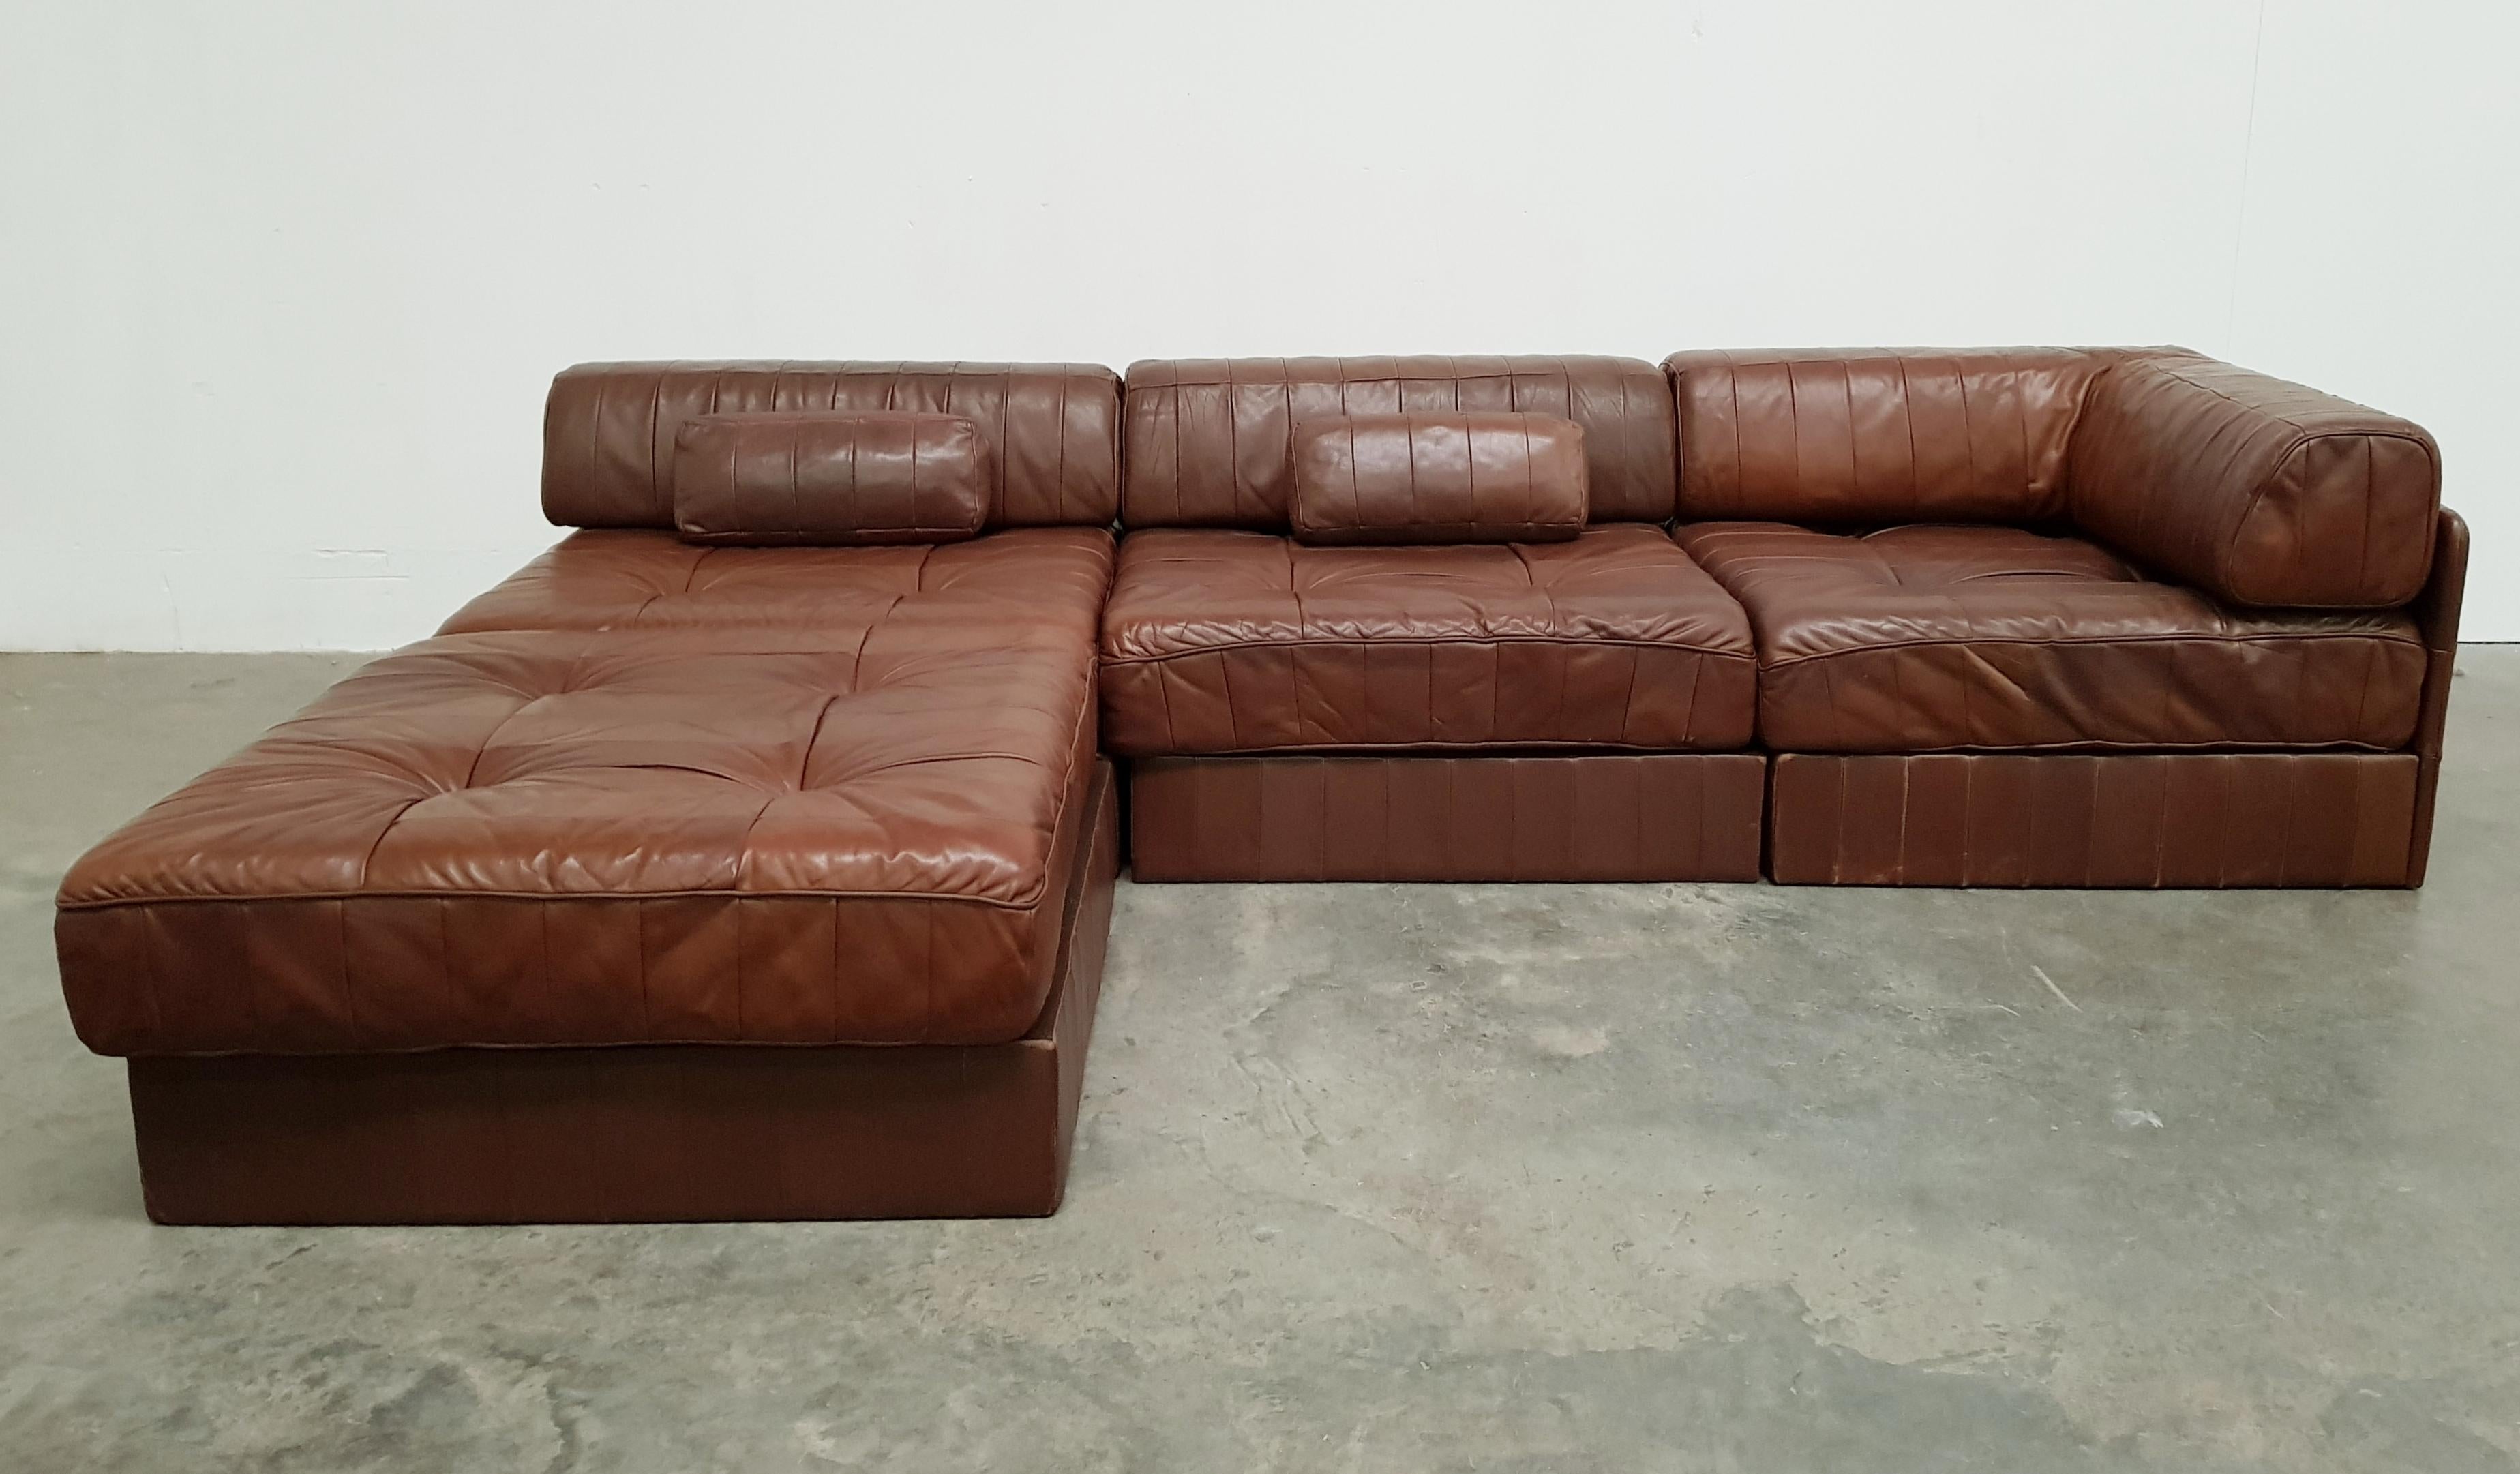 De Sede DS 88 sectional sofa in patchwork brown leather. 
The sofa is in four sections with a base leather patchwork cushion made from soft luxurious leather. This modular sofa can be used in several different positions.
90 cm W x 90cm D x 65cm H